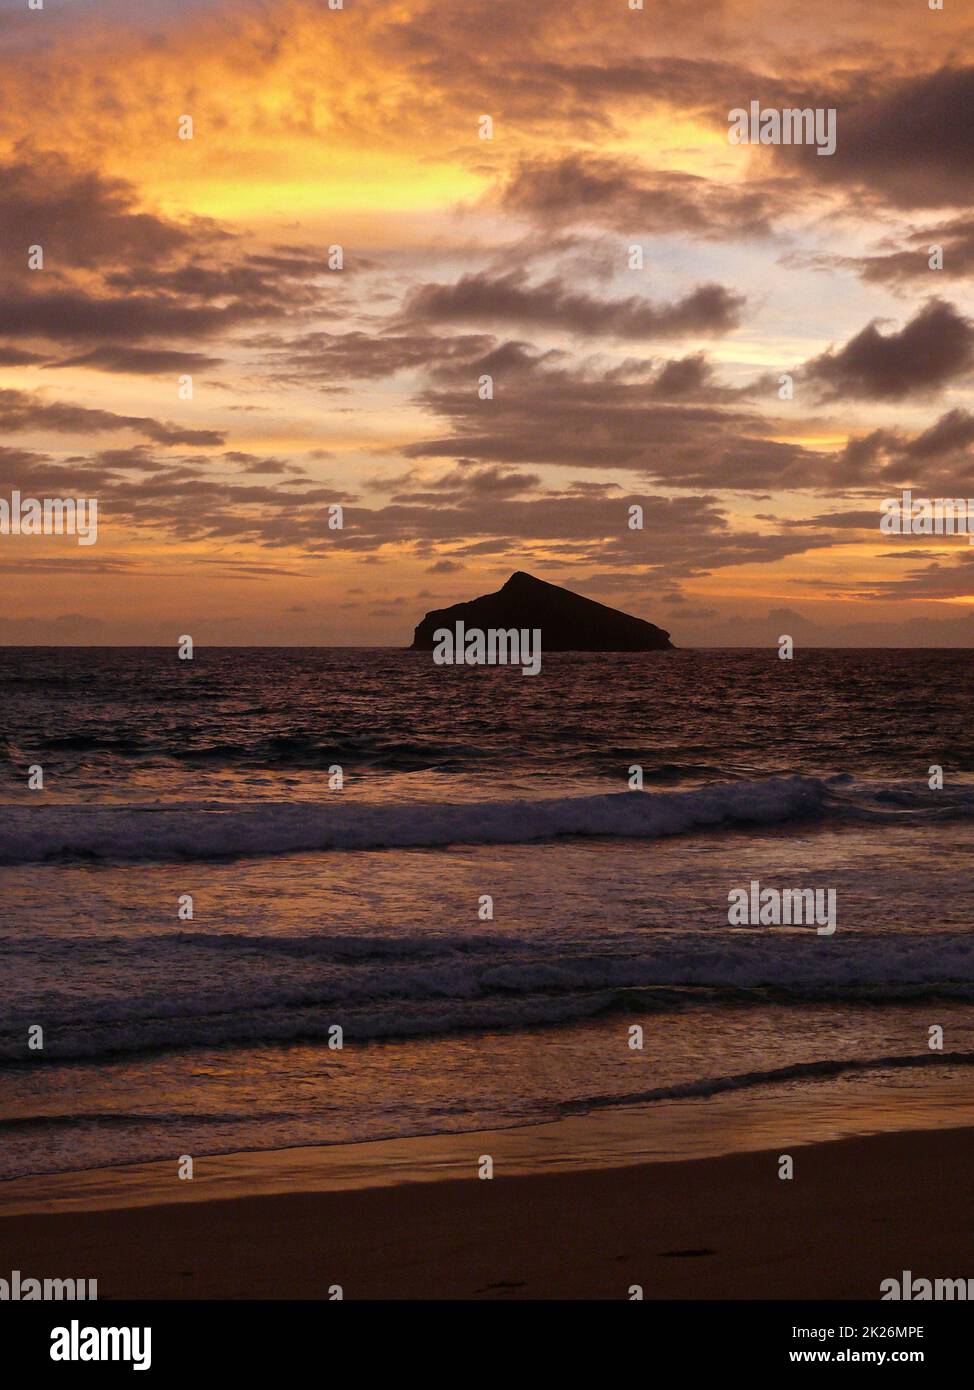 A view at sunrise from Blinky Beach on Lord Howe Island in Australia Stock Photo